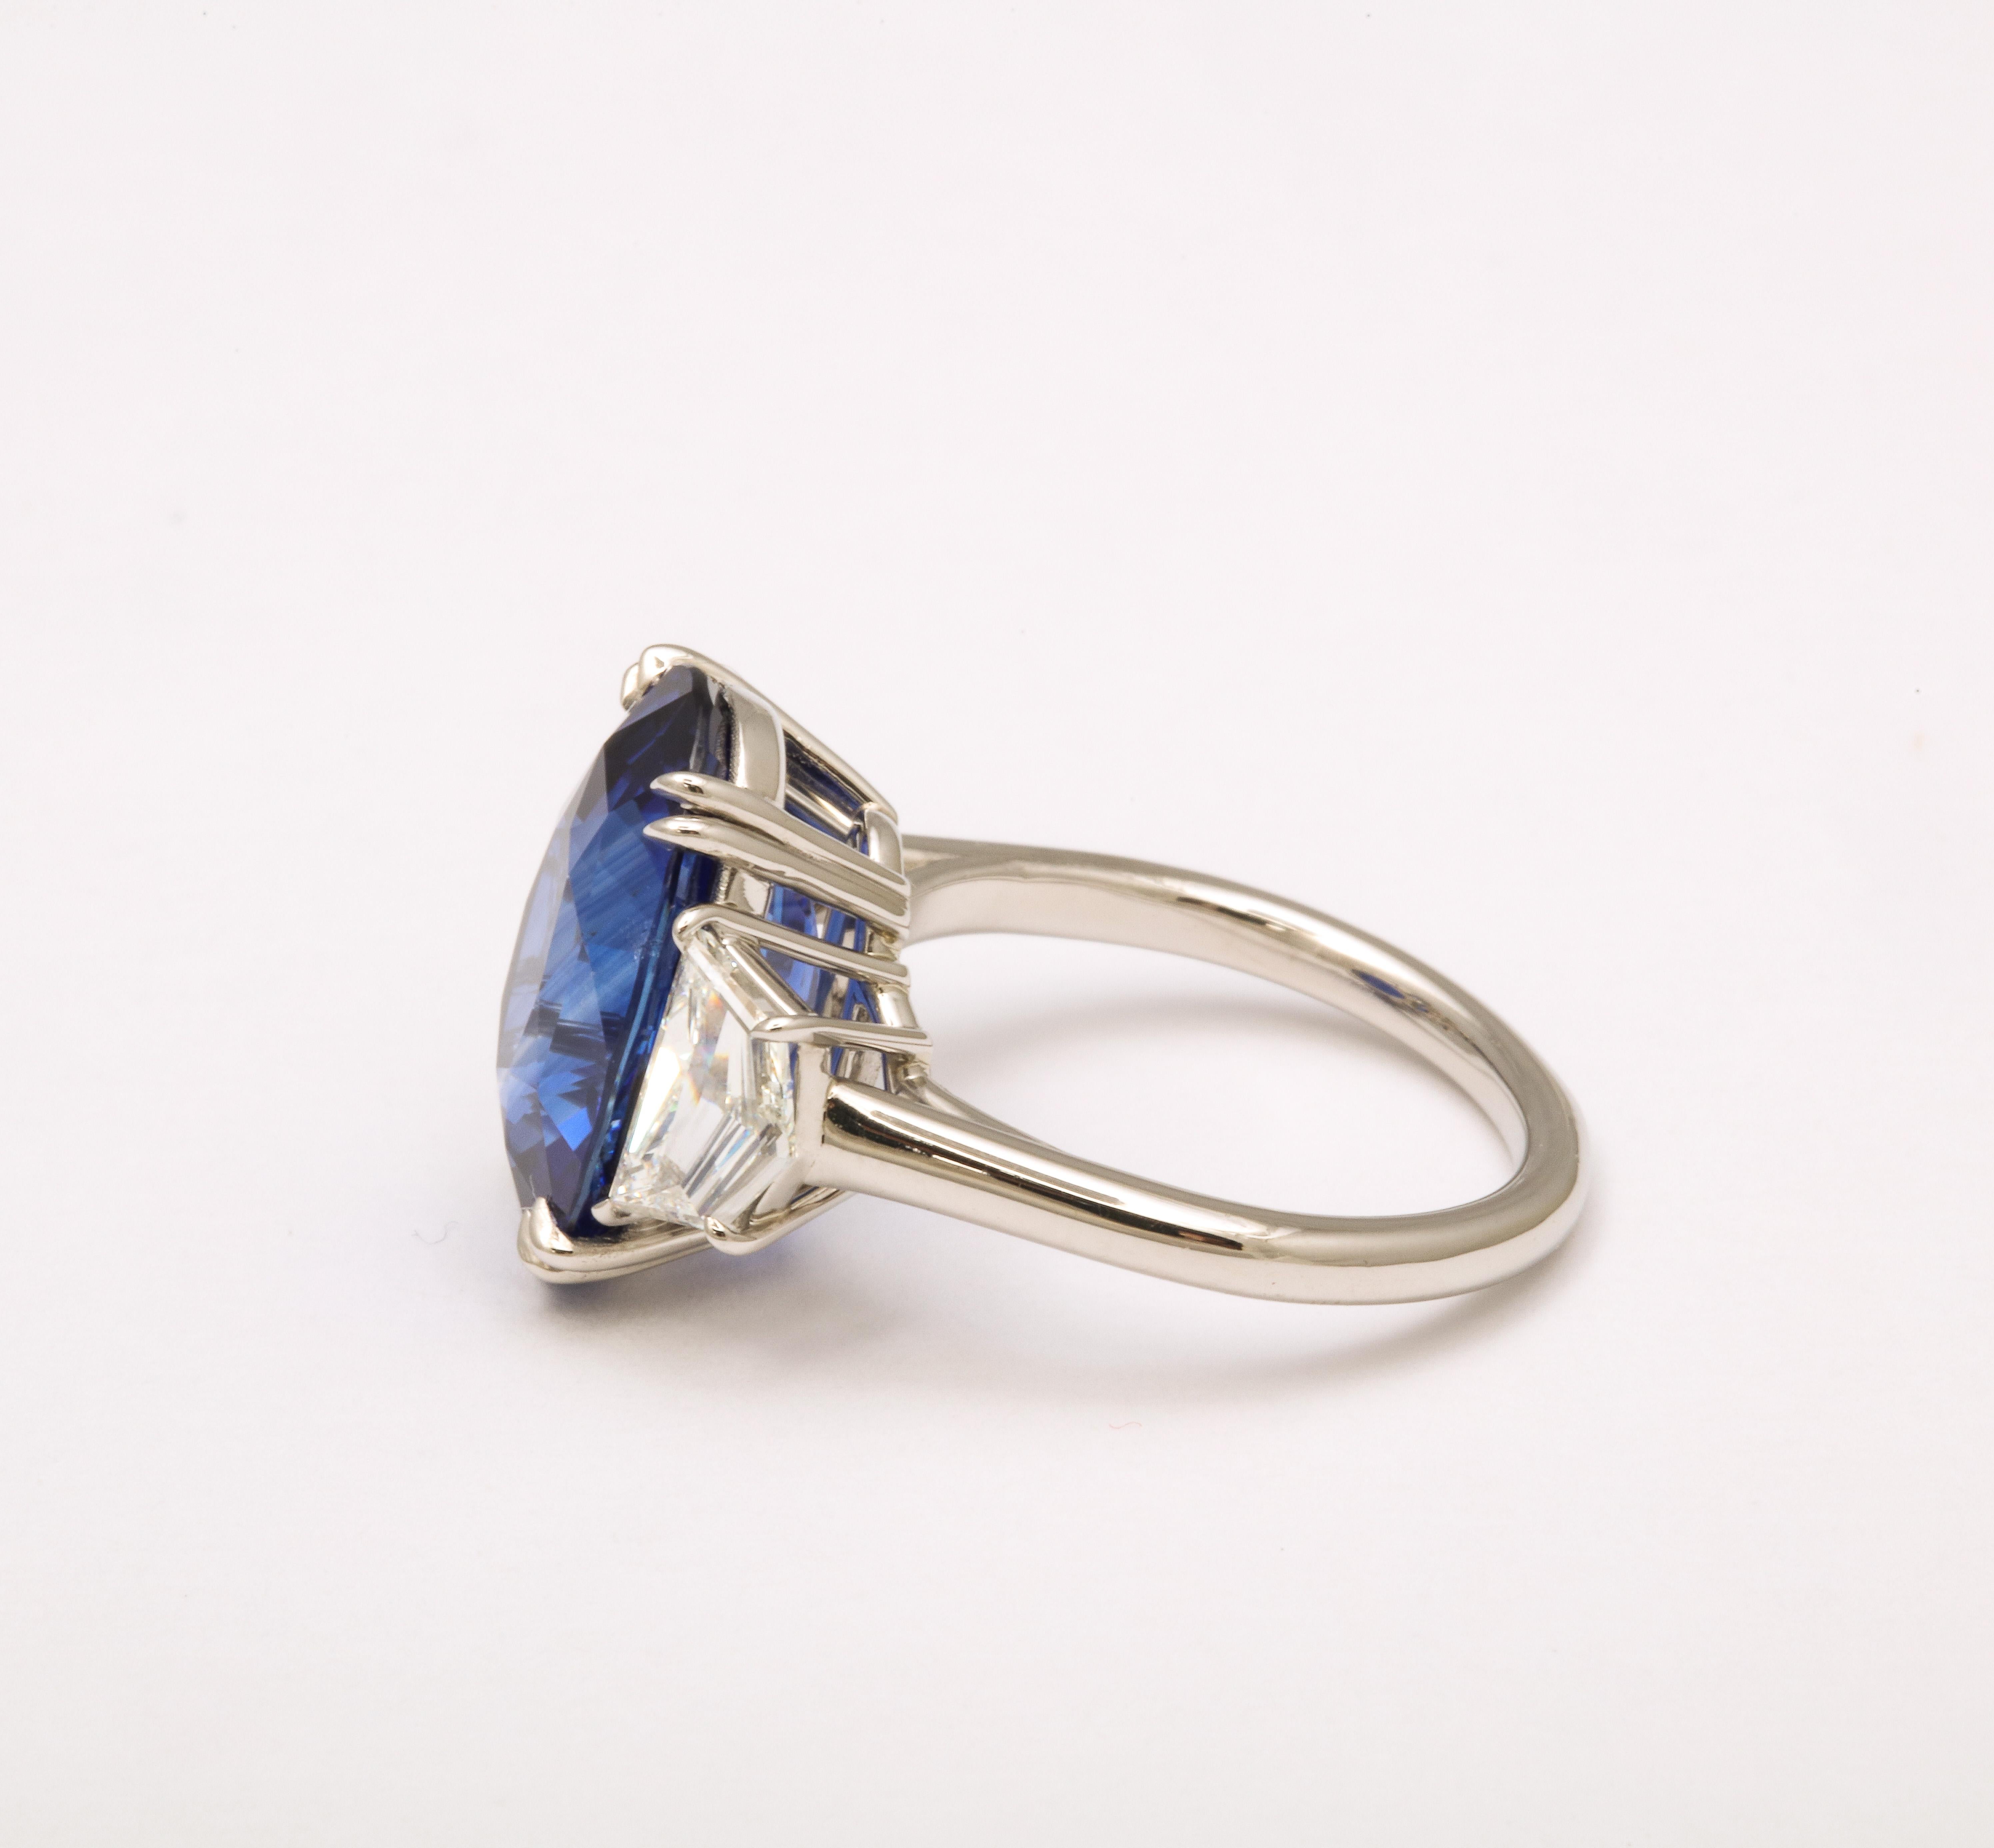 10 Carat Vivid Blue Sapphire and Diamond Ring For Sale at 1stDibs